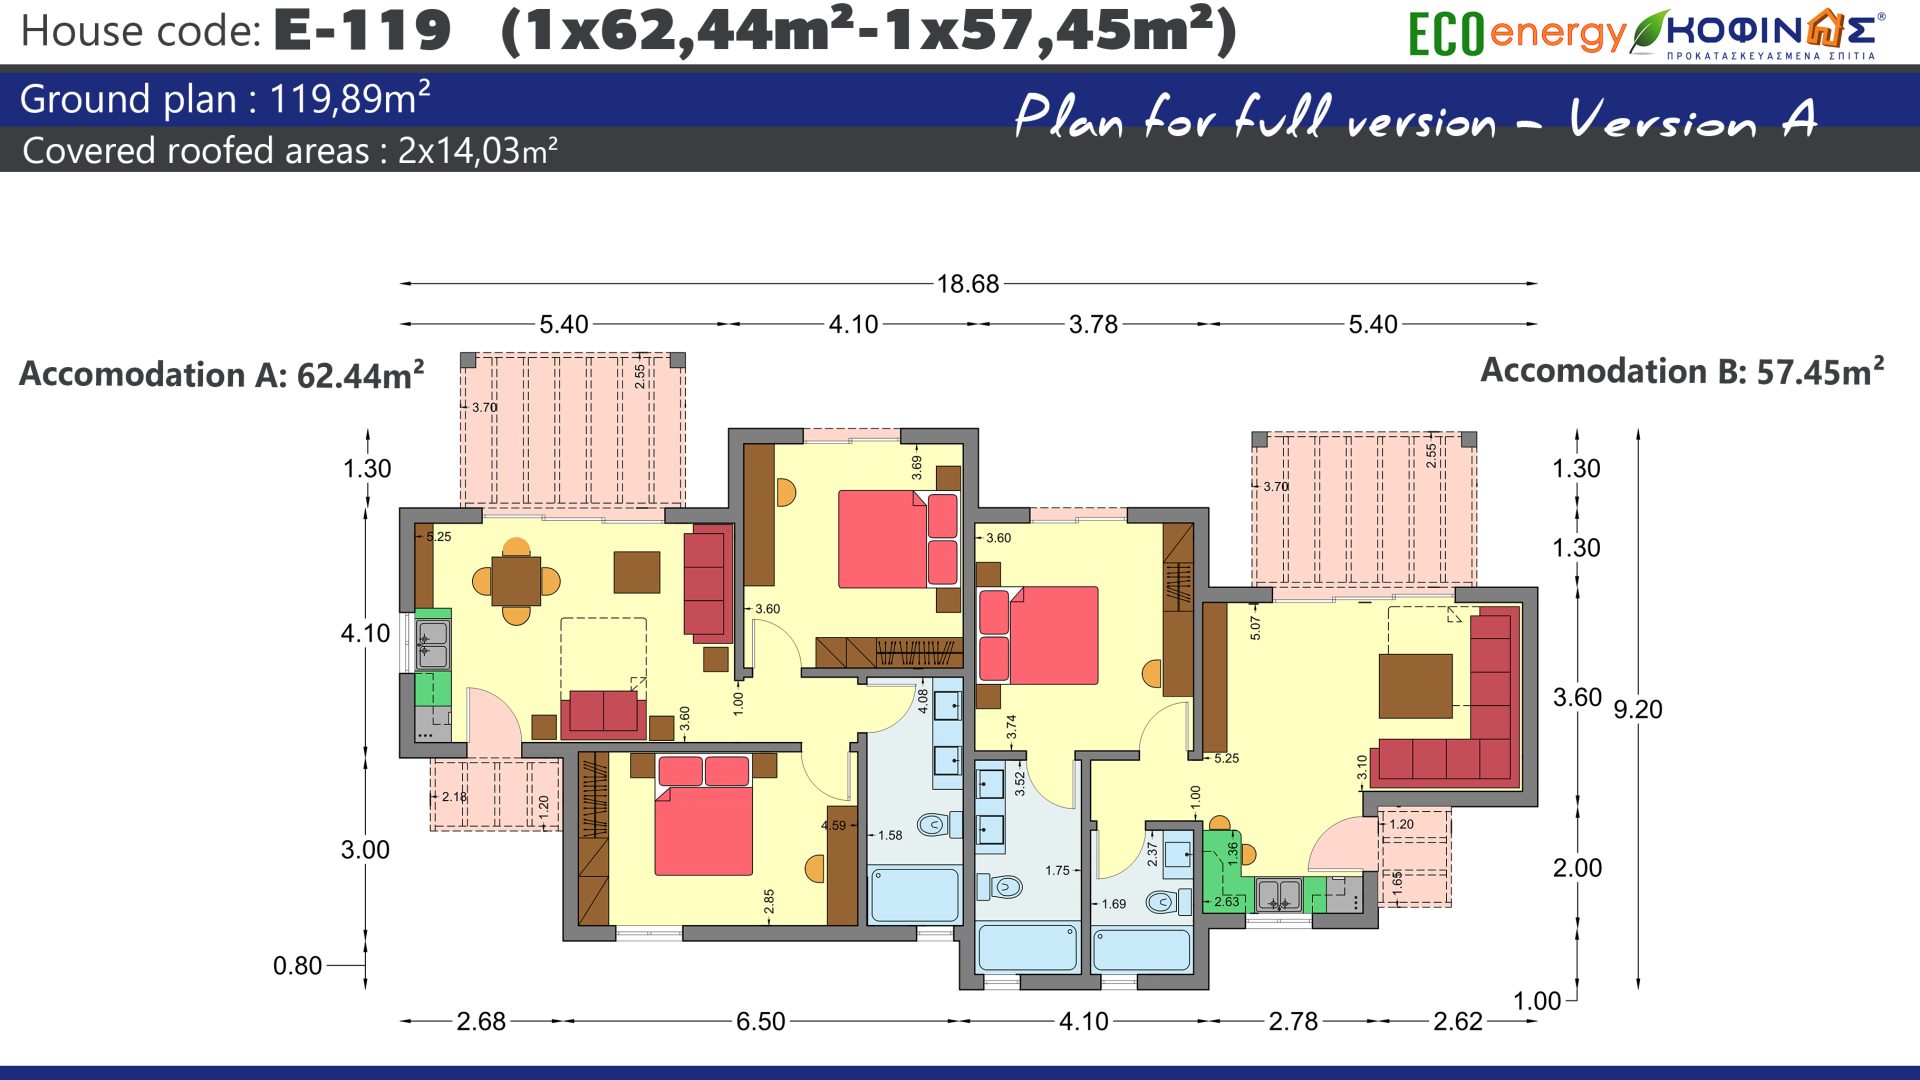 1 Storey Complex E-119, total surface of 1 x 62.44 and 1 x 57.45= 119,89 m² (version A+C) and 2 x 63.58 = 127.16 m²(version B) , covered roofed areas 14,03 m²(version A+C) and 14.67 m² (Version B)